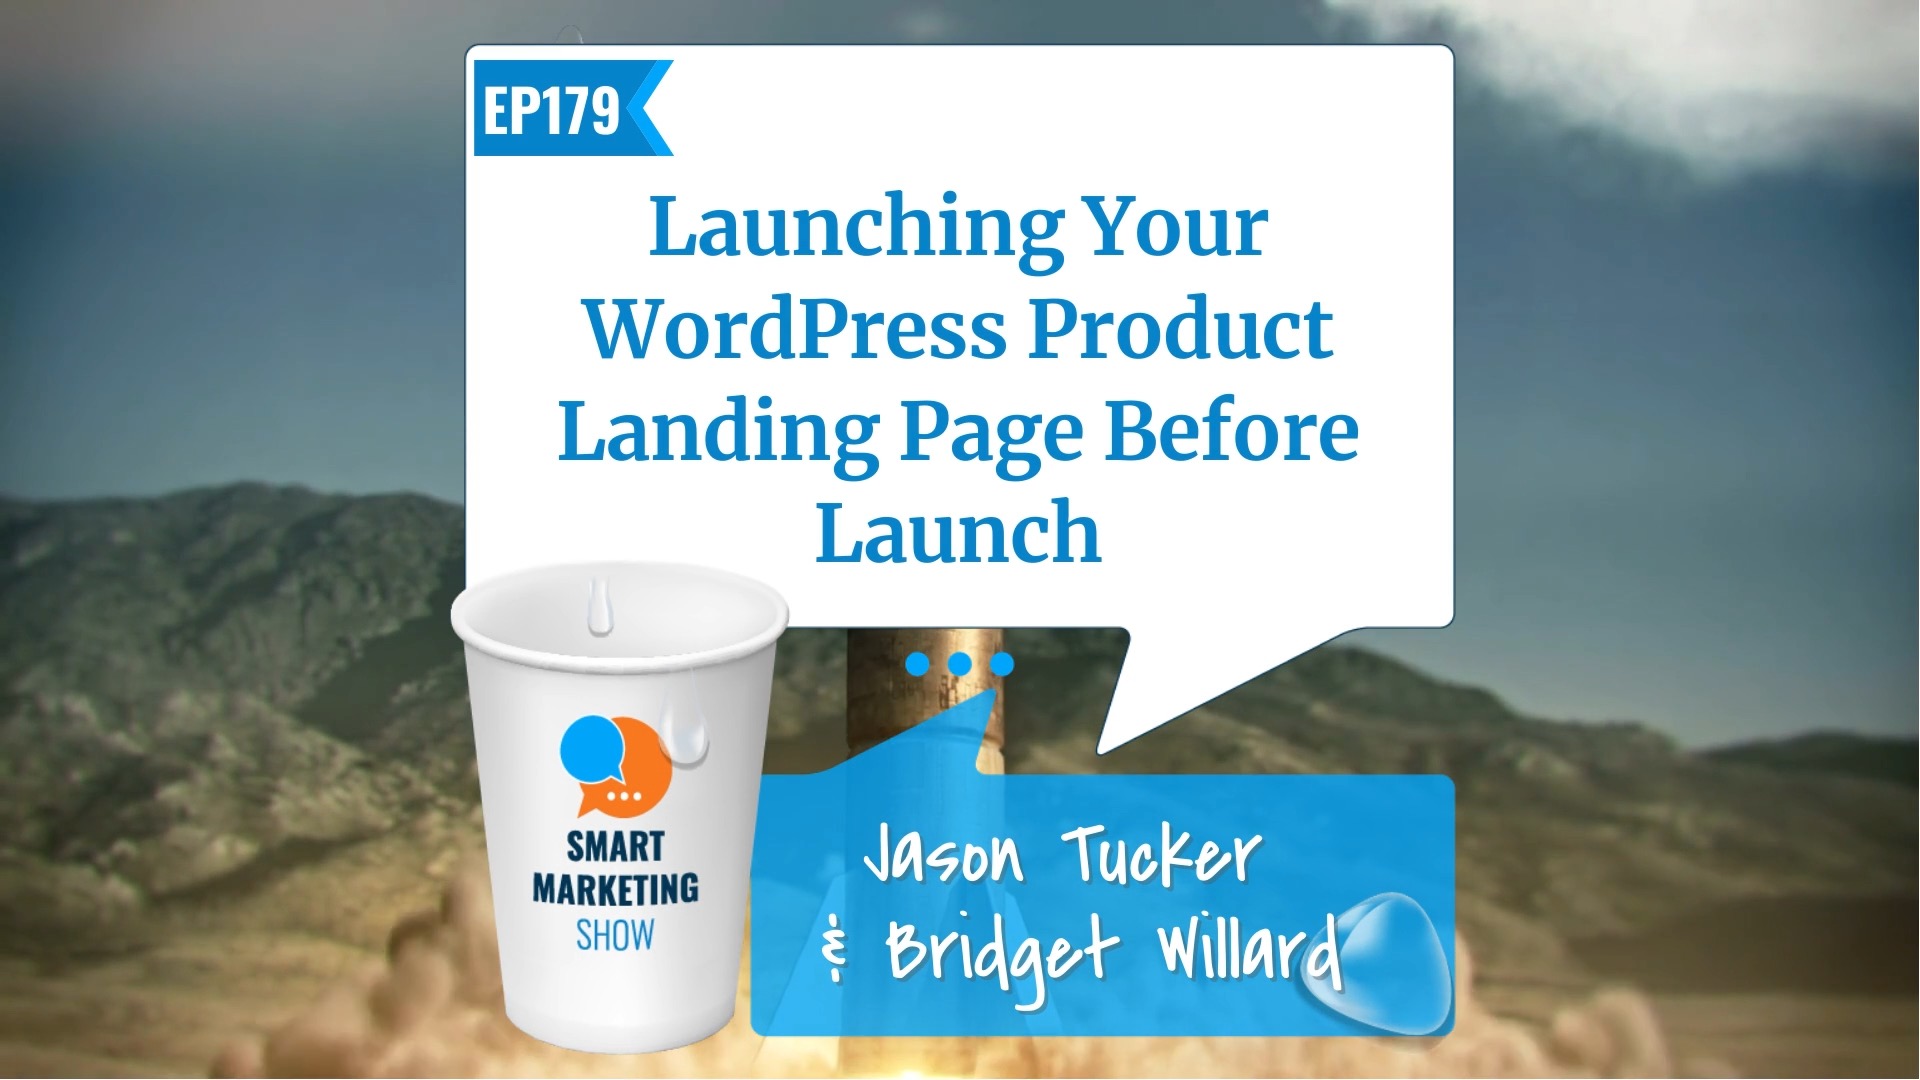 EP179 – Launching Your WordPress Product Landing Page Before Launch